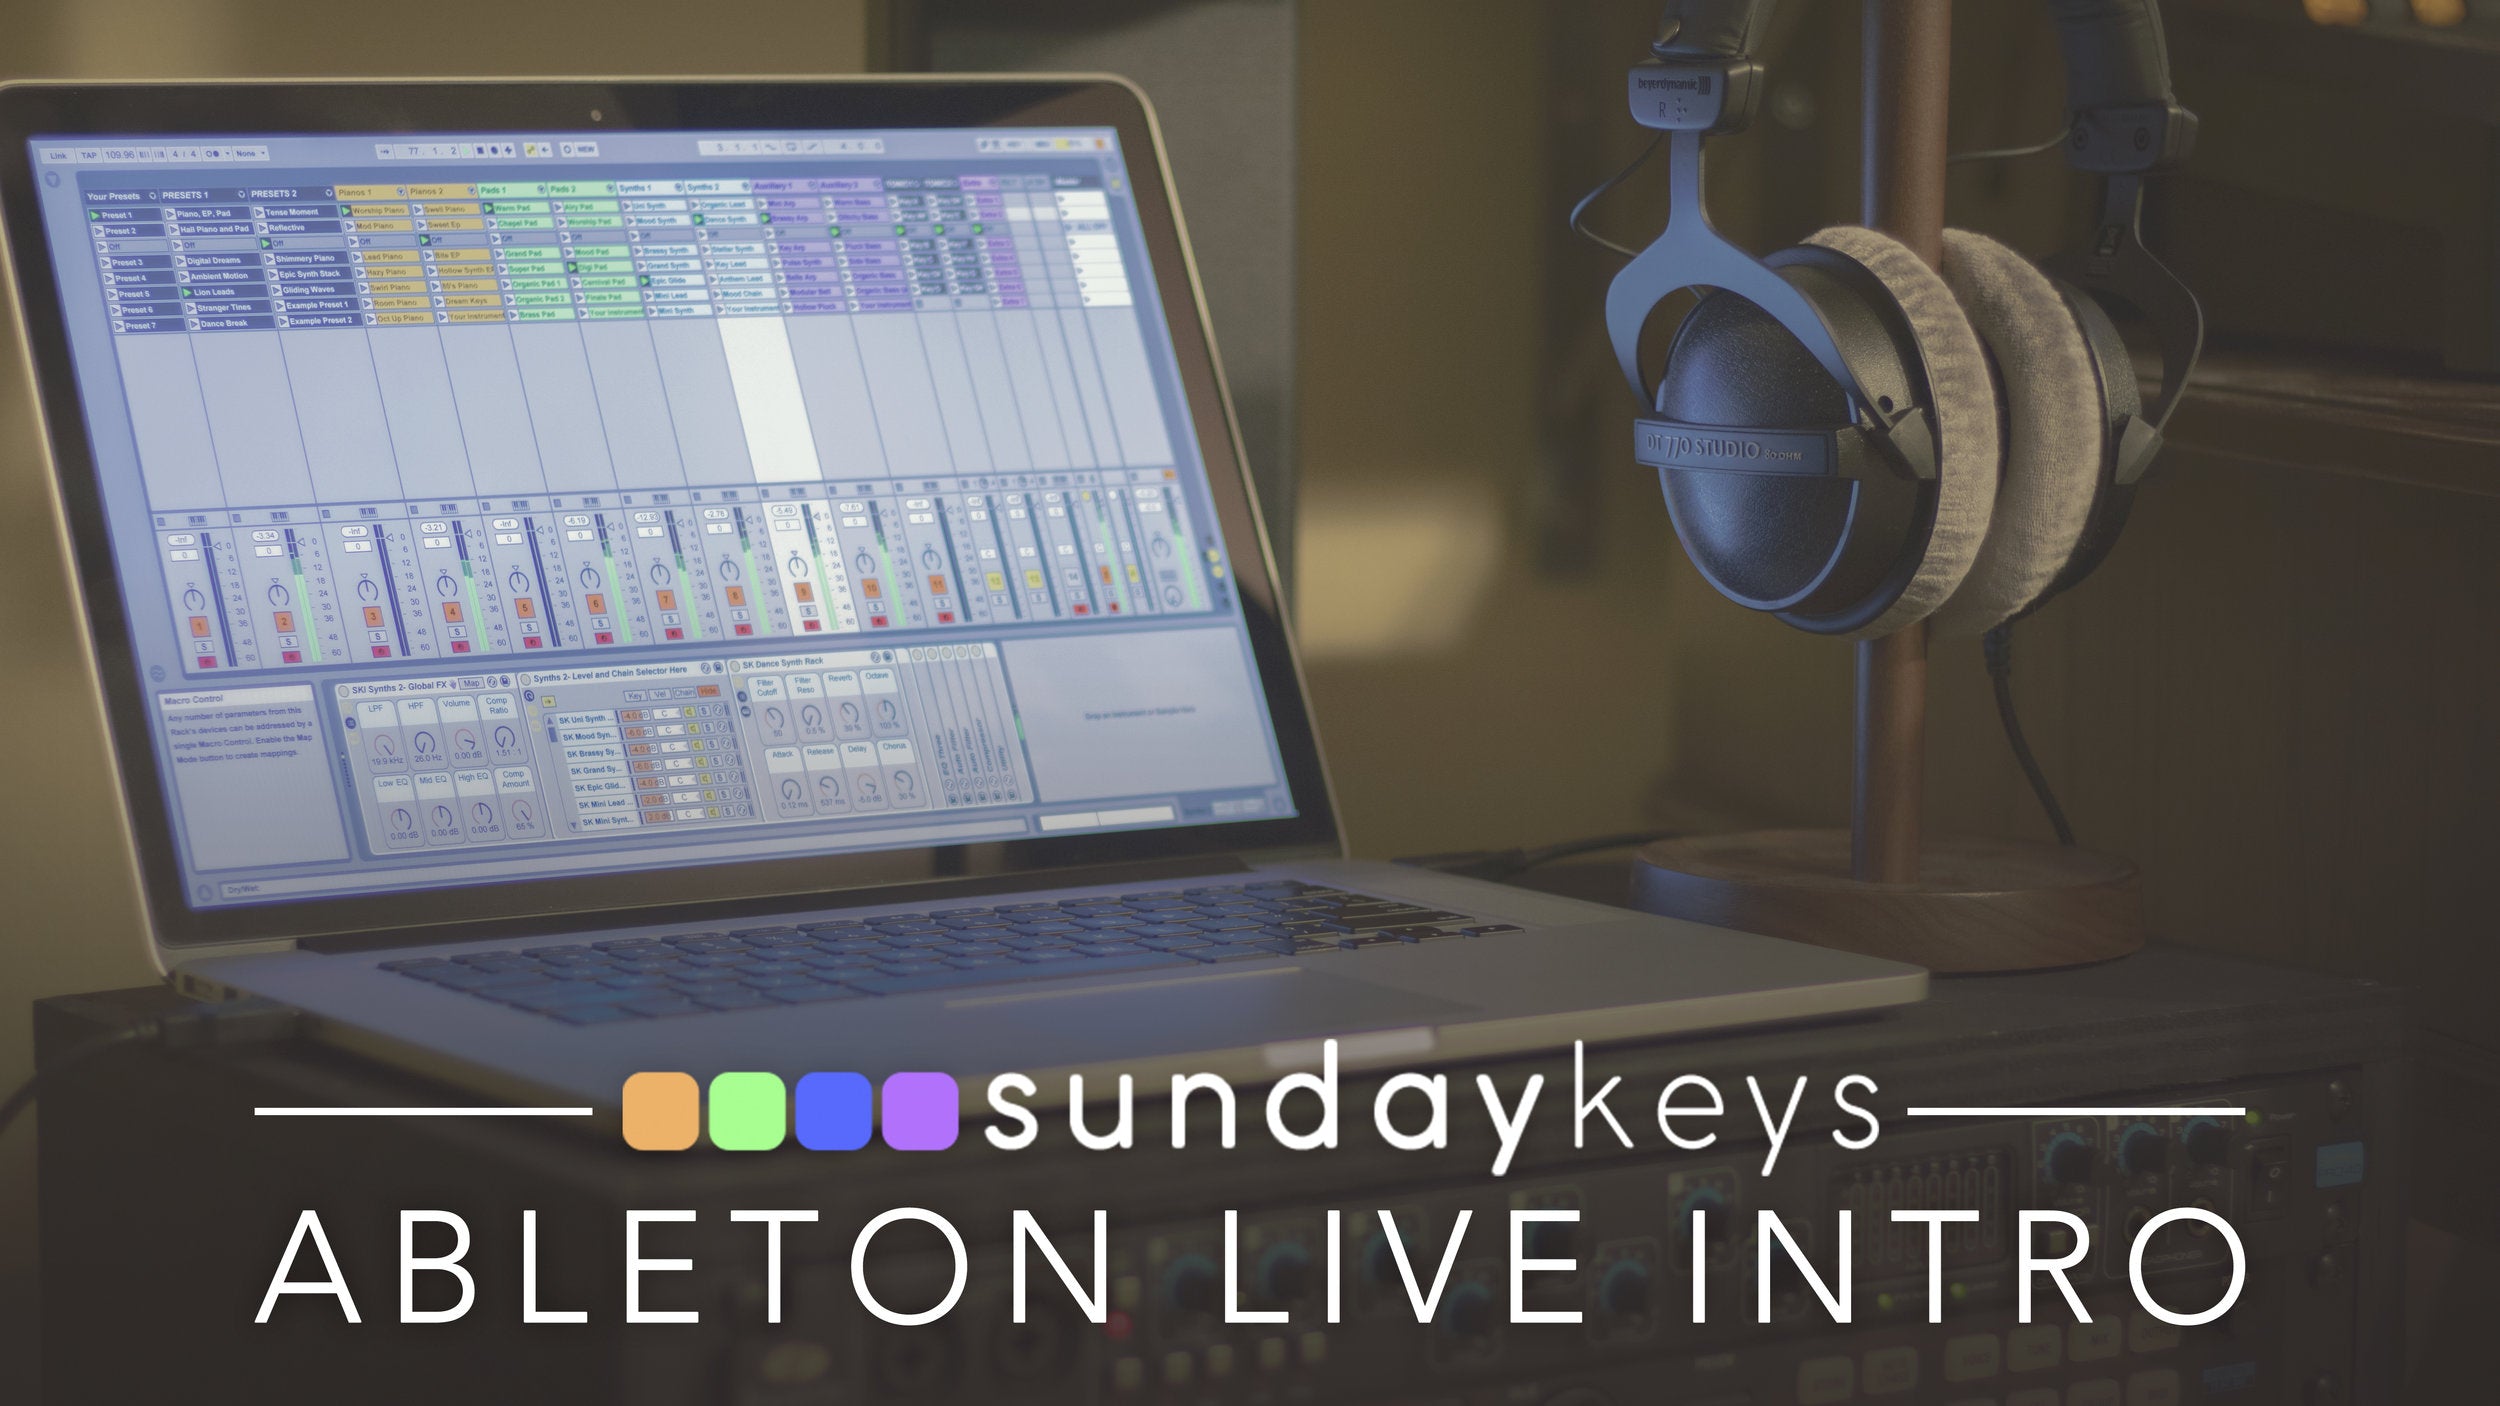 Sunday Keys Now Compatible with Ableton Live Intro!